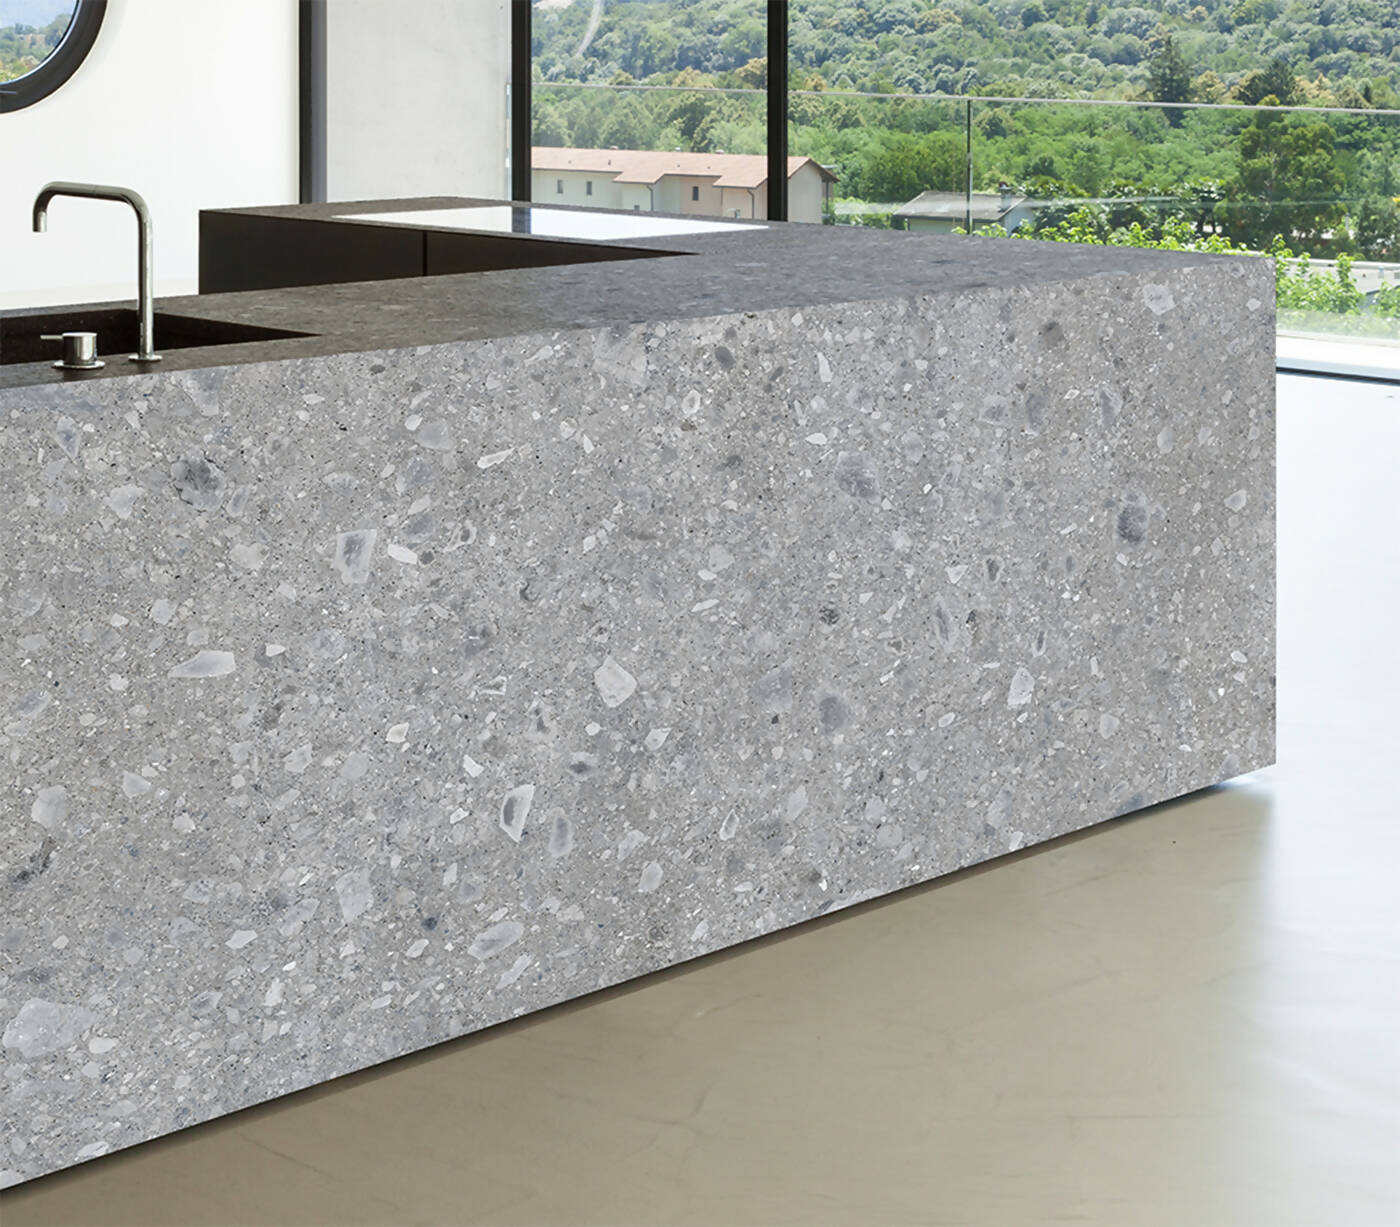 CEPO GREY PORCELAIN BOOKMATCH,Porcelain,Work-Tops,www.work-tops.com